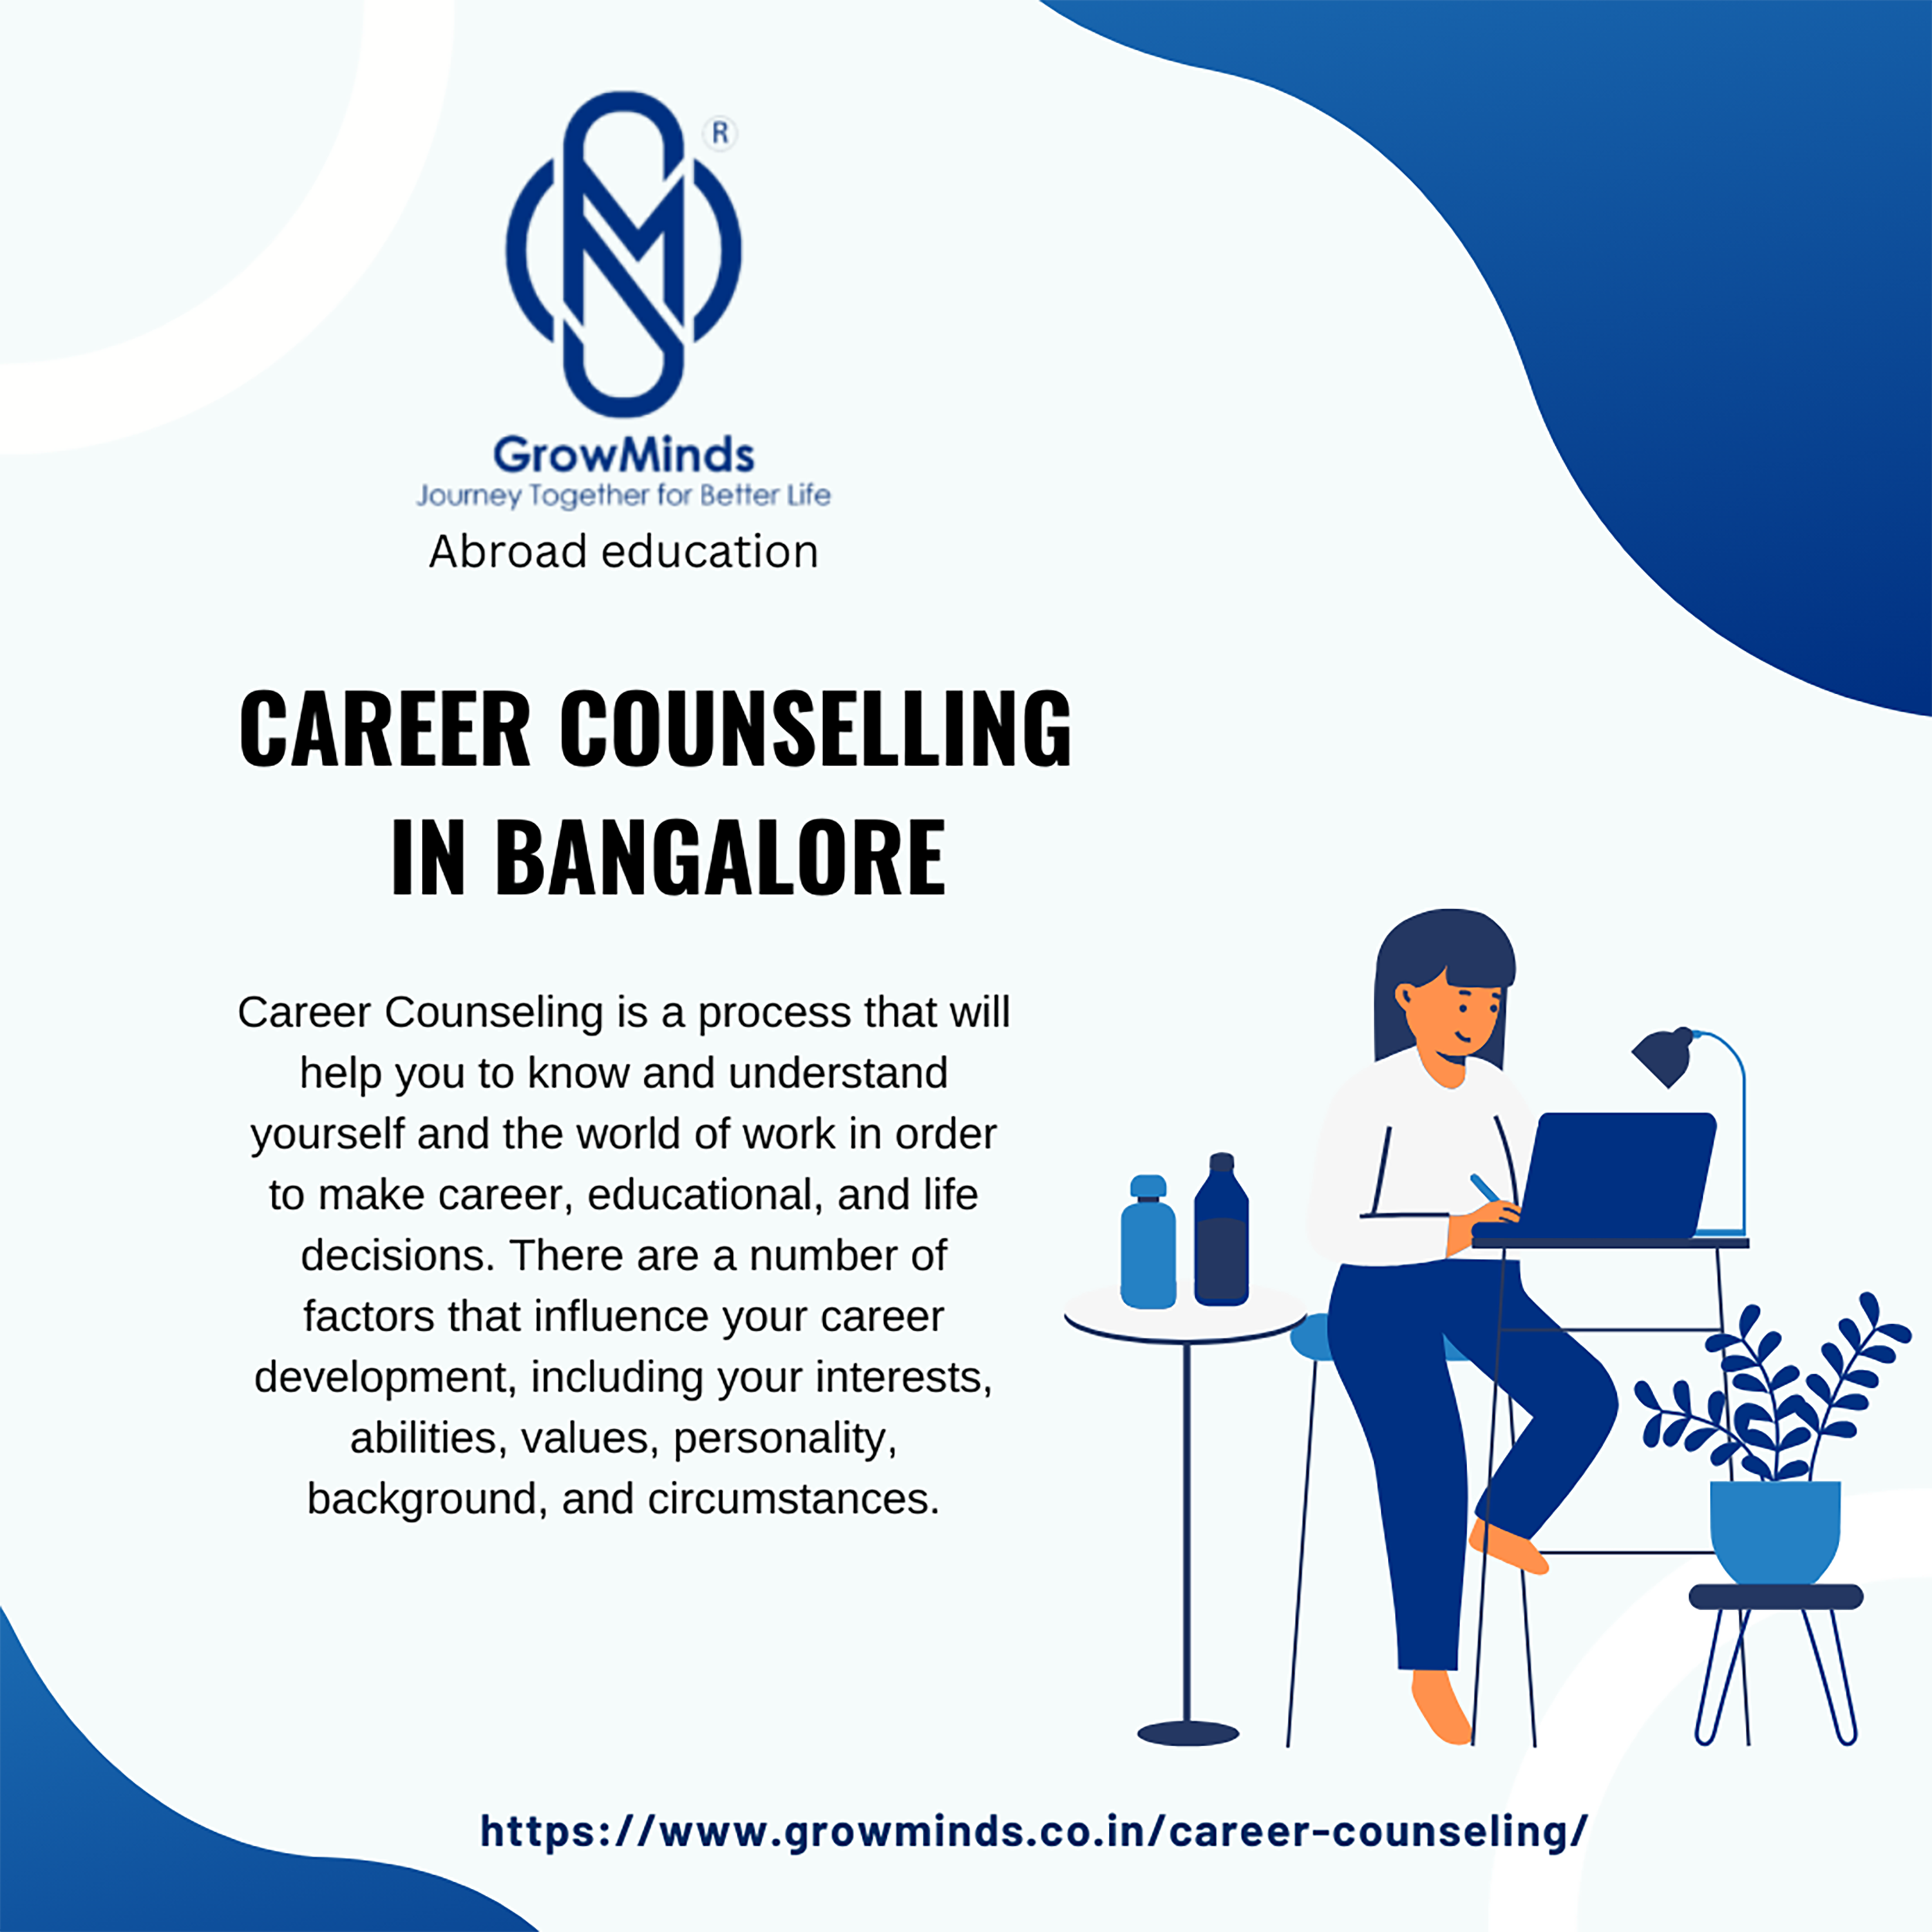 N)

GrowMinds

Journey Together for Better Life

Abroad education

CAREER COUNSELLING
IN BANGALORE

Career Counseling is a process that will
help you to know and understand
yourself and the world of work in order

to make career, educational, and life i A | A

 

  

  

decisions. There are a number of
factors that influence your career
development, including your interests,
abilities, values, personality,
background, and circumstances.

 

     

https://www.growminds.co.in/career-counseling/